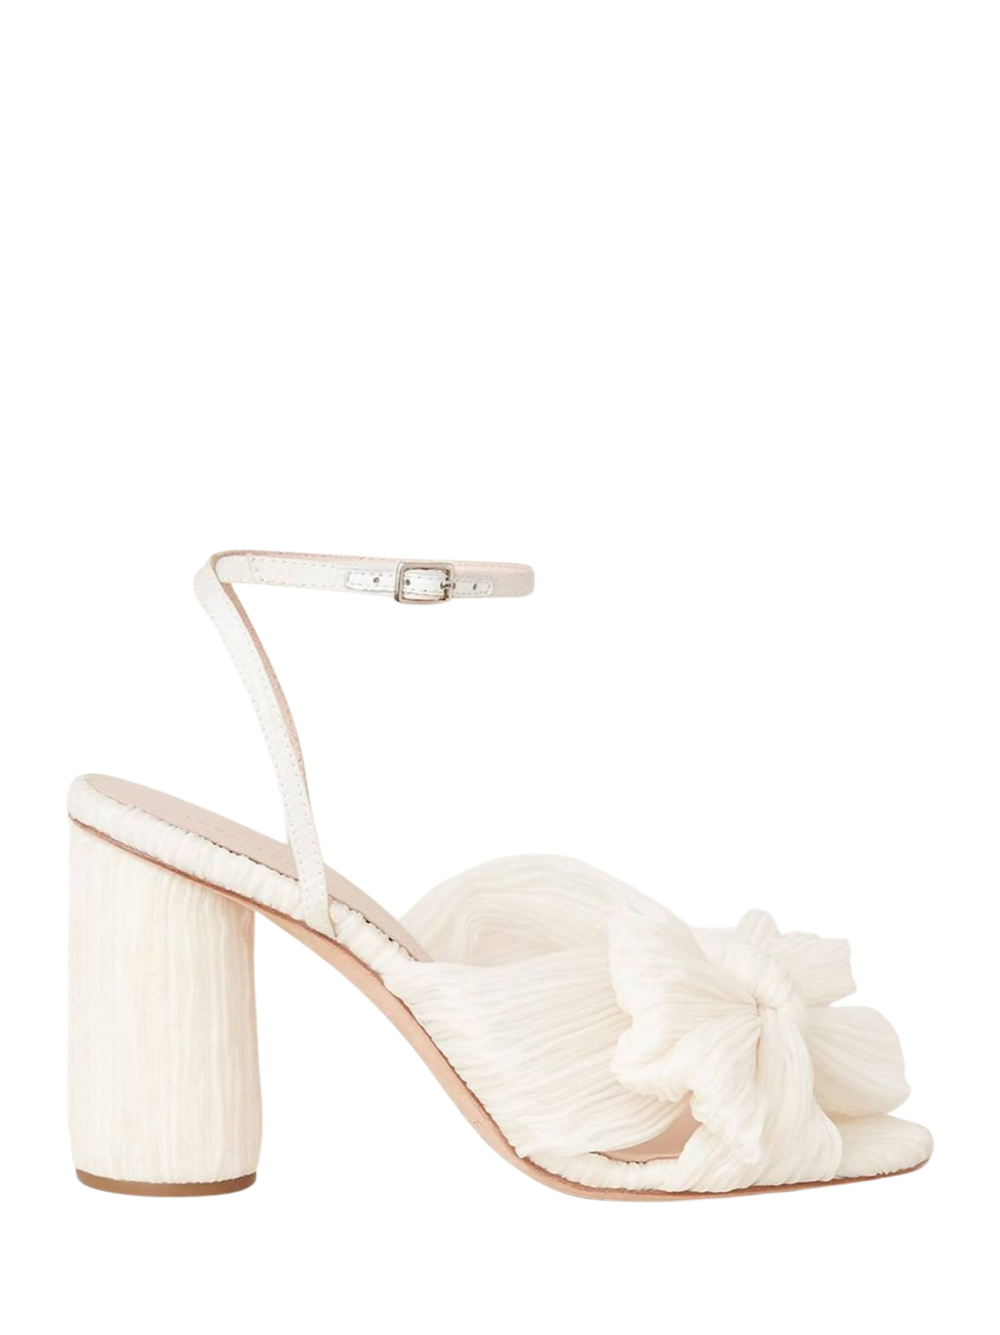 Loeffler Randall Camellia Knot Mule With Ankle Strap in Pearl